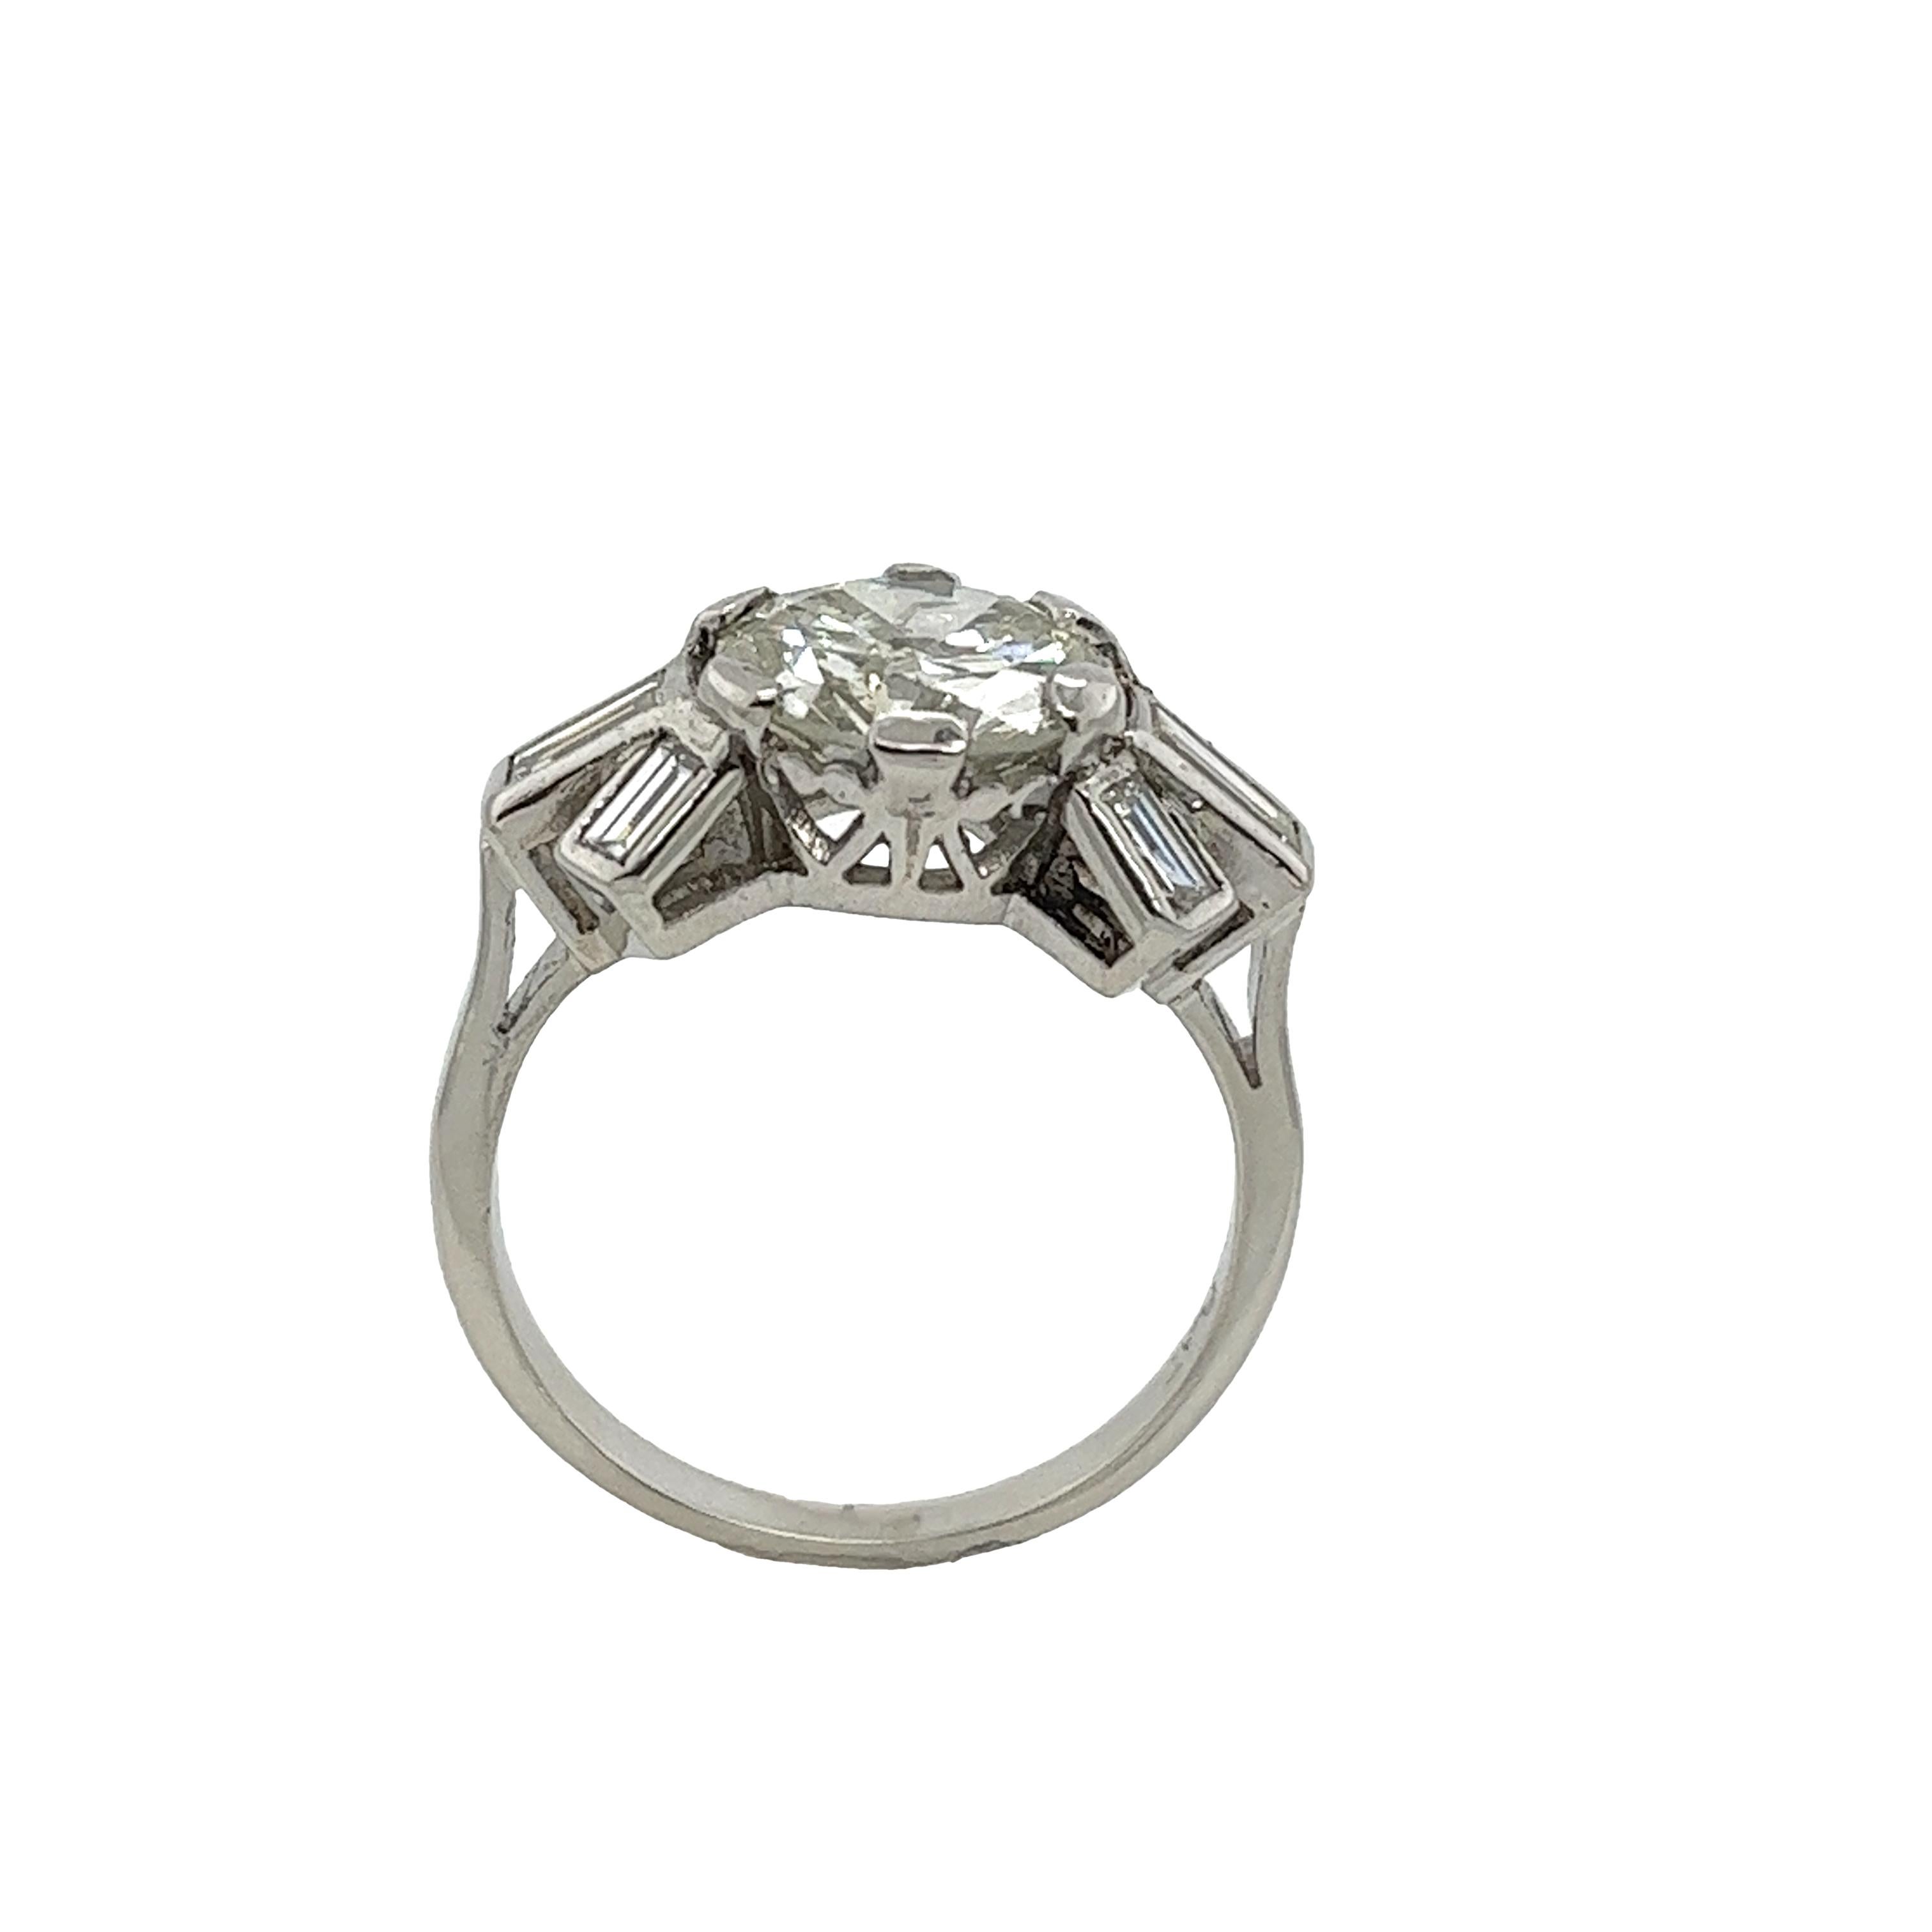 Round Cut Diamond Solitaire Ring Set With 2.62ct L/I2 & 4 Baguette Diamonds For Sale